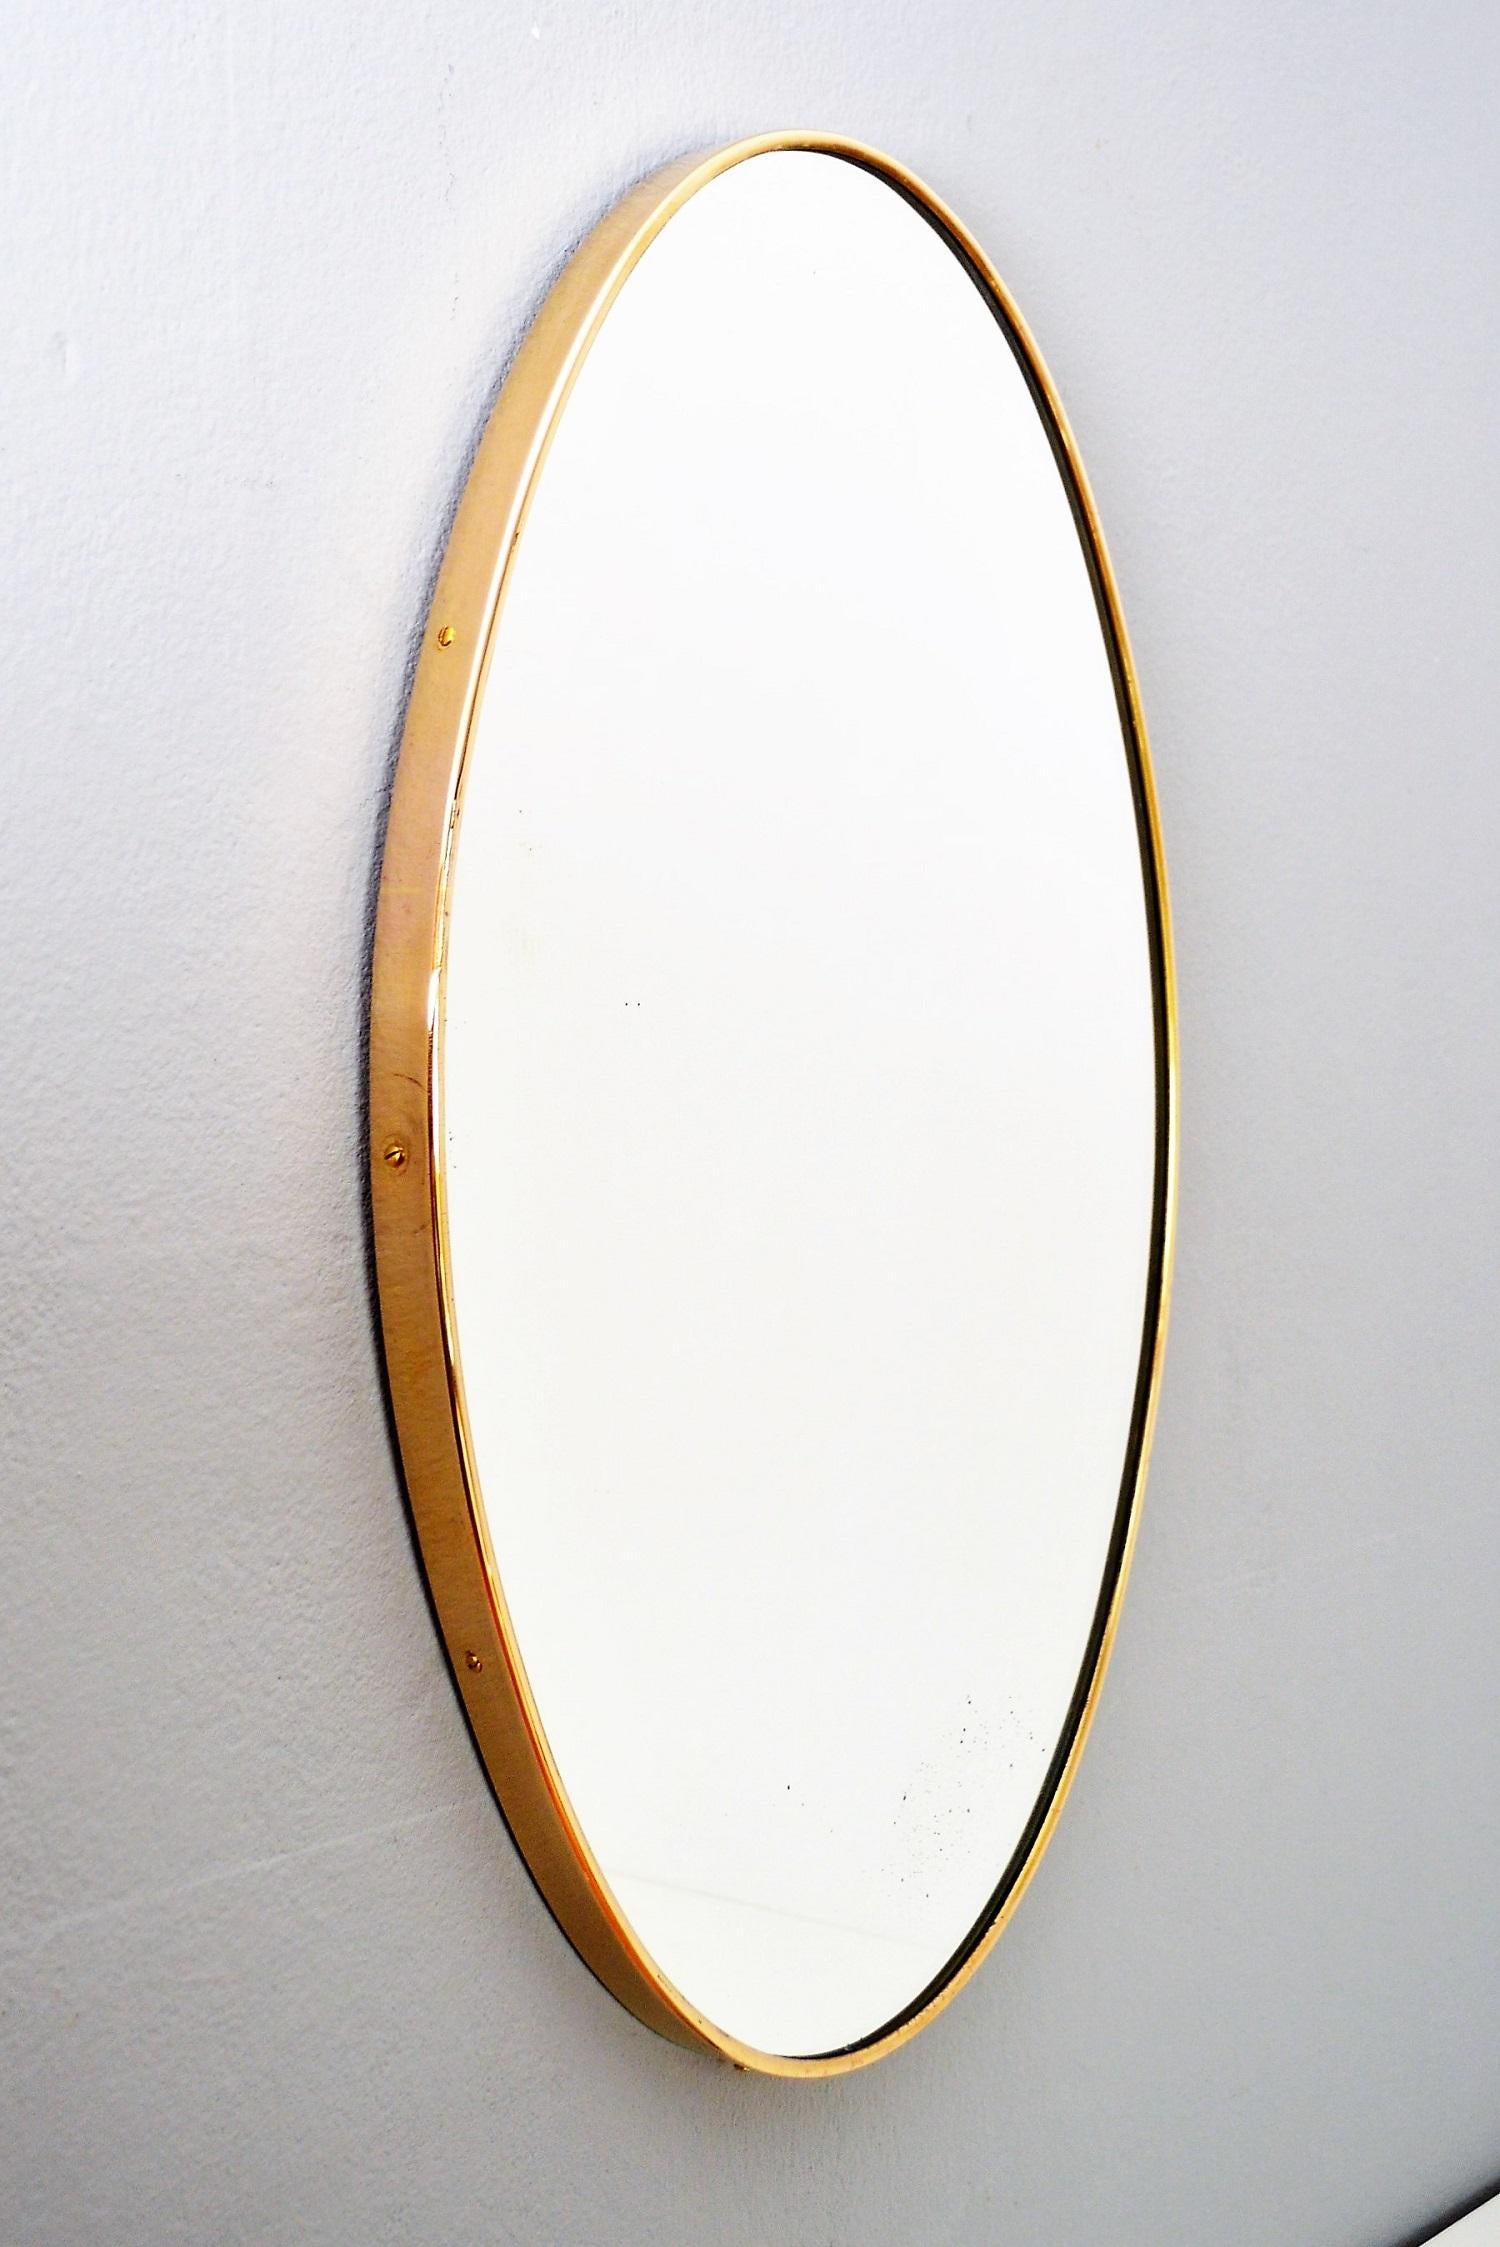 Beautiful small and heavy oval wall mirror with thick brass frame from Italian midcentury production.
The mirrored glass have been replaced with a new one and is therefore in excellent condition.
The mirror is equipped with strong wooden back